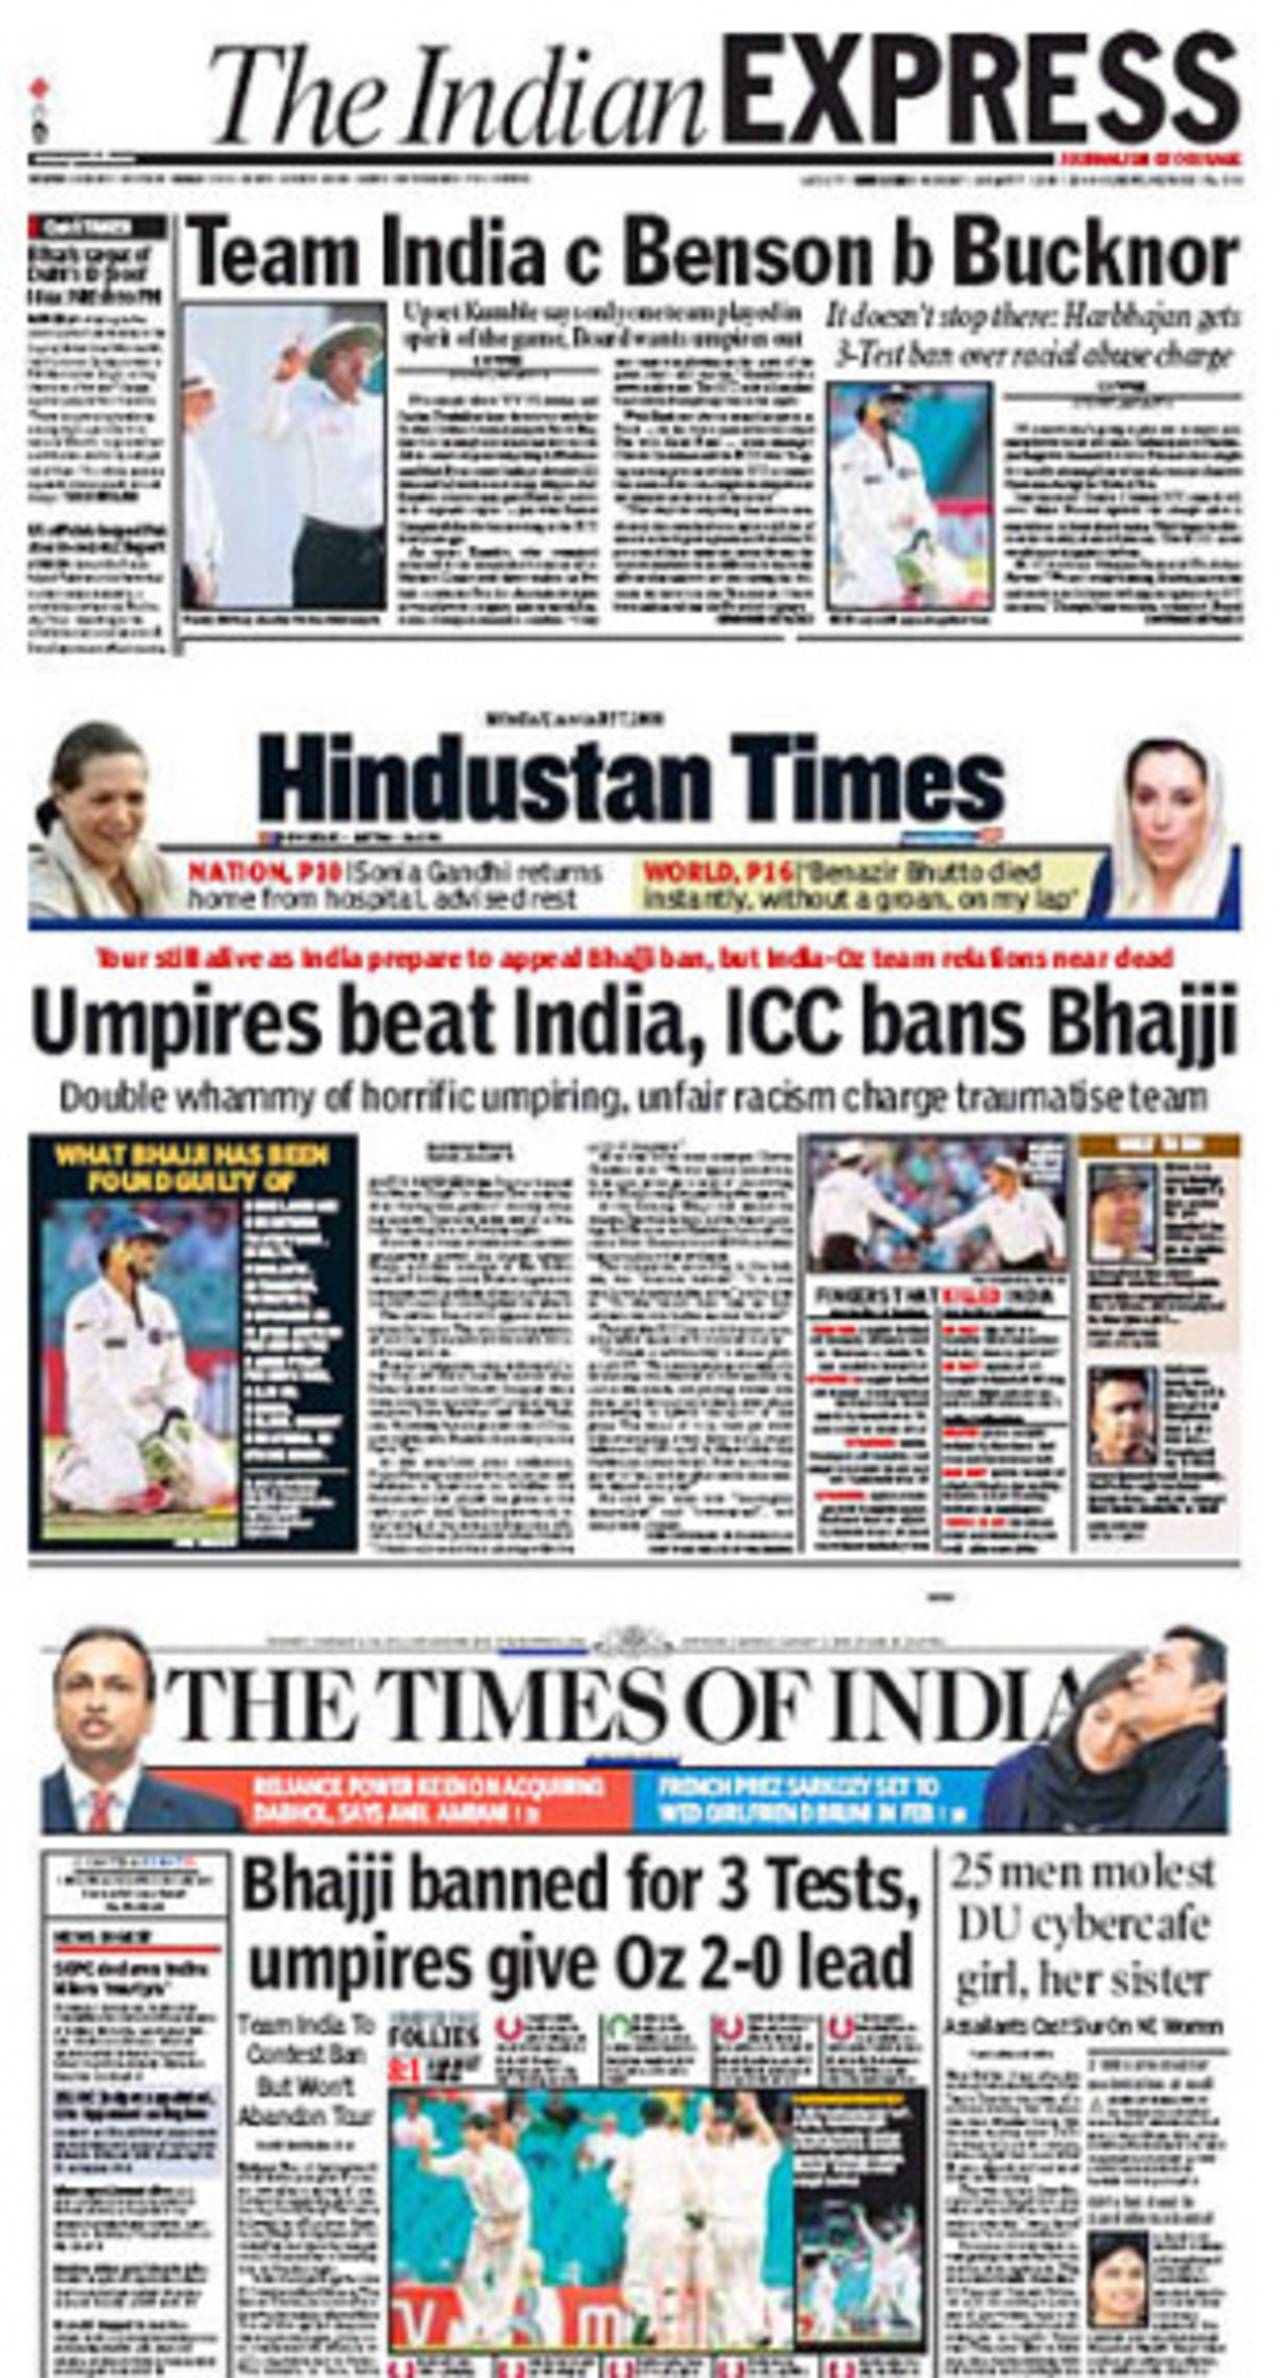 India's newspapers react with anger to the umpiring during the Sydney Test, January 7, 2008